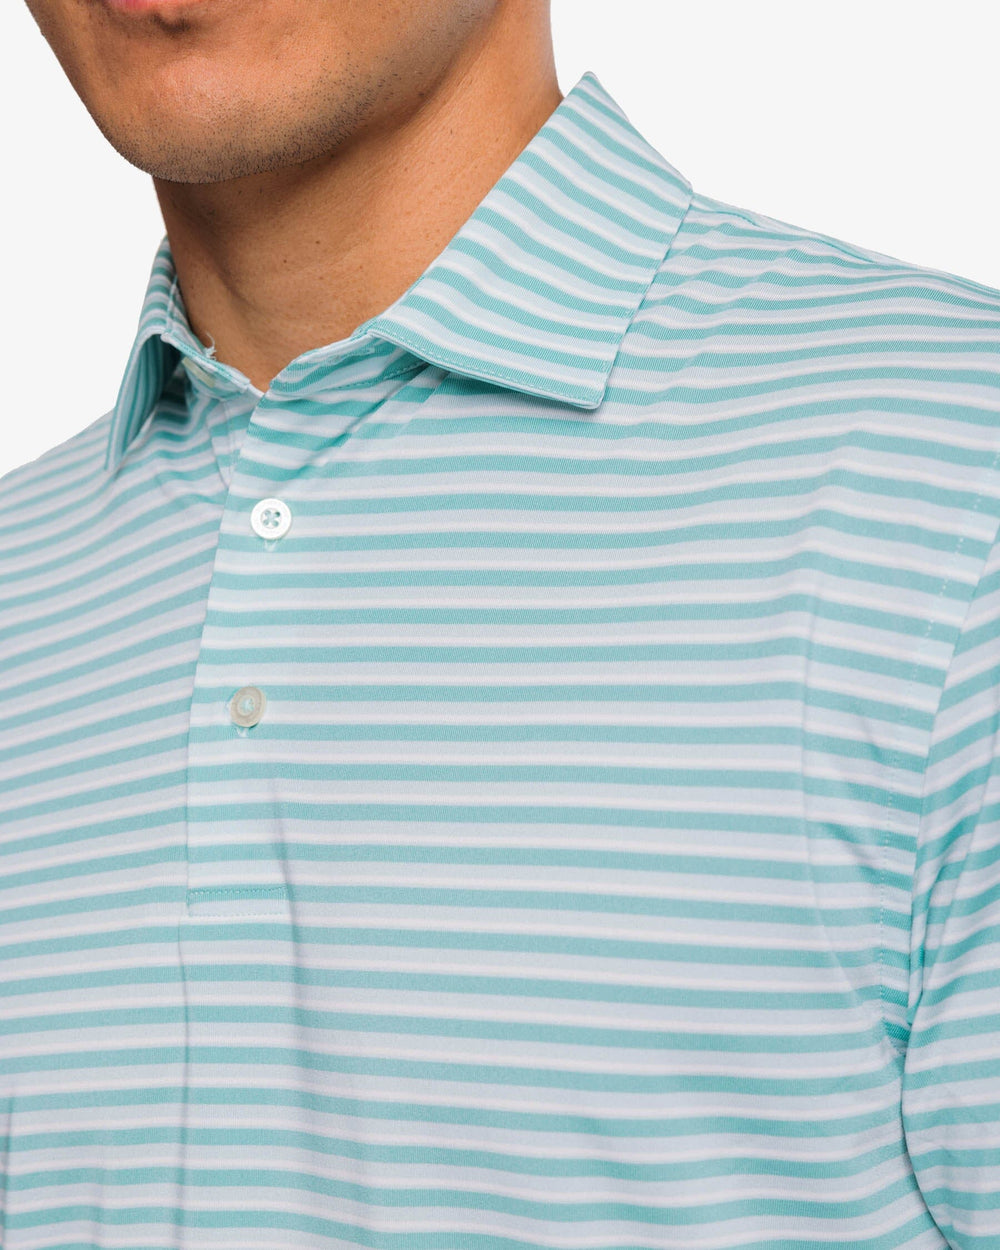 The detail view of the Southern Tide Driver Gulf Stripe Polo Shirt by Southern Tide - Turquoise Sea